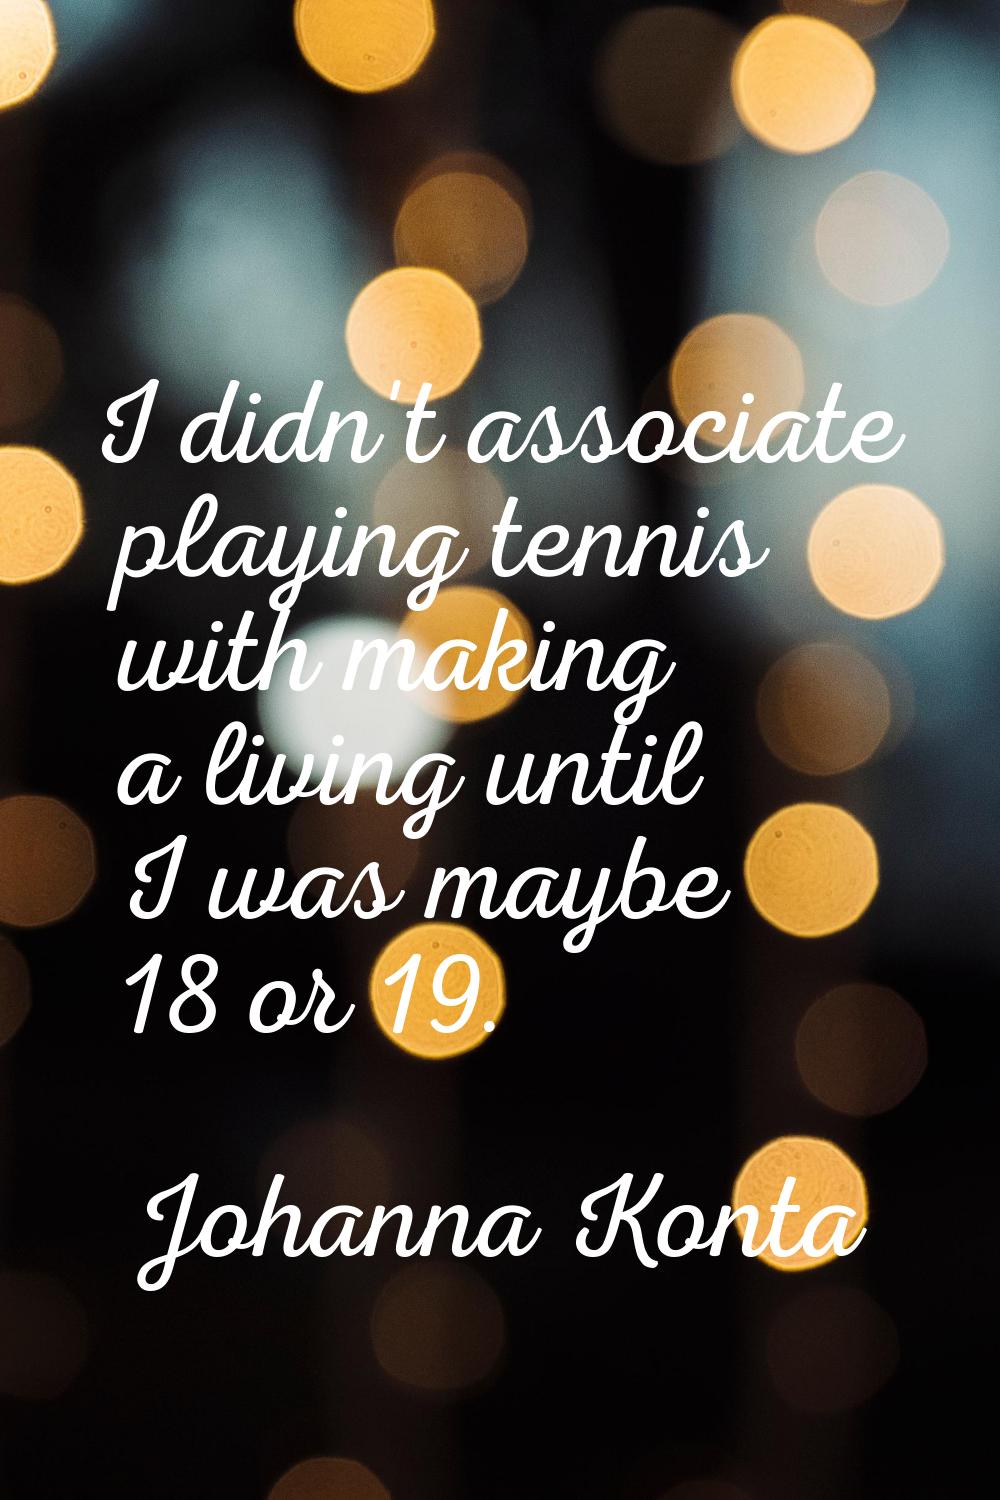 I didn't associate playing tennis with making a living until I was maybe 18 or 19.